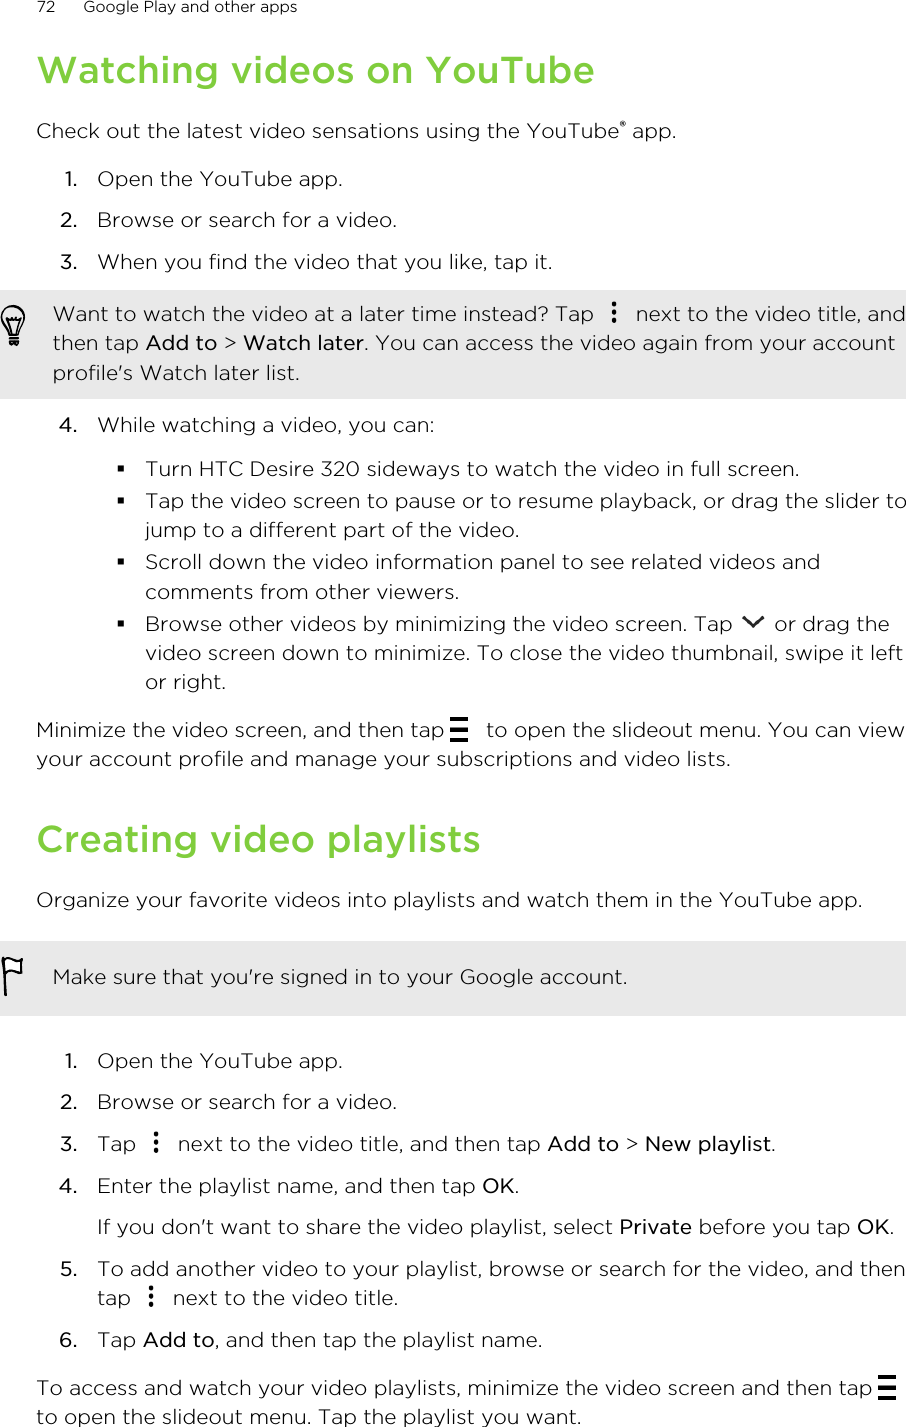 Watching videos on YouTubeCheck out the latest video sensations using the YouTube® app.1. Open the YouTube app.2. Browse or search for a video.3. When you find the video that you like, tap it. Want to watch the video at a later time instead? Tap   next to the video title, andthen tap Add to &gt; Watch later. You can access the video again from your accountprofile&apos;s Watch later list.4. While watching a video, you can:§Turn HTC Desire 320 sideways to watch the video in full screen.§Tap the video screen to pause or to resume playback, or drag the slider tojump to a different part of the video.§Scroll down the video information panel to see related videos andcomments from other viewers.§Browse other videos by minimizing the video screen. Tap   or drag thevideo screen down to minimize. To close the video thumbnail, swipe it leftor right.Minimize the video screen, and then tap   to open the slideout menu. You can viewyour account profile and manage your subscriptions and video lists.Creating video playlistsOrganize your favorite videos into playlists and watch them in the YouTube app.Make sure that you&apos;re signed in to your Google account.1. Open the YouTube app.2. Browse or search for a video.3. Tap   next to the video title, and then tap Add to &gt; New playlist.4. Enter the playlist name, and then tap OK. If you don&apos;t want to share the video playlist, select Private before you tap OK.5. To add another video to your playlist, browse or search for the video, and thentap   next to the video title.6. Tap Add to, and then tap the playlist name.To access and watch your video playlists, minimize the video screen and then tap to open the slideout menu. Tap the playlist you want.72 Google Play and other apps